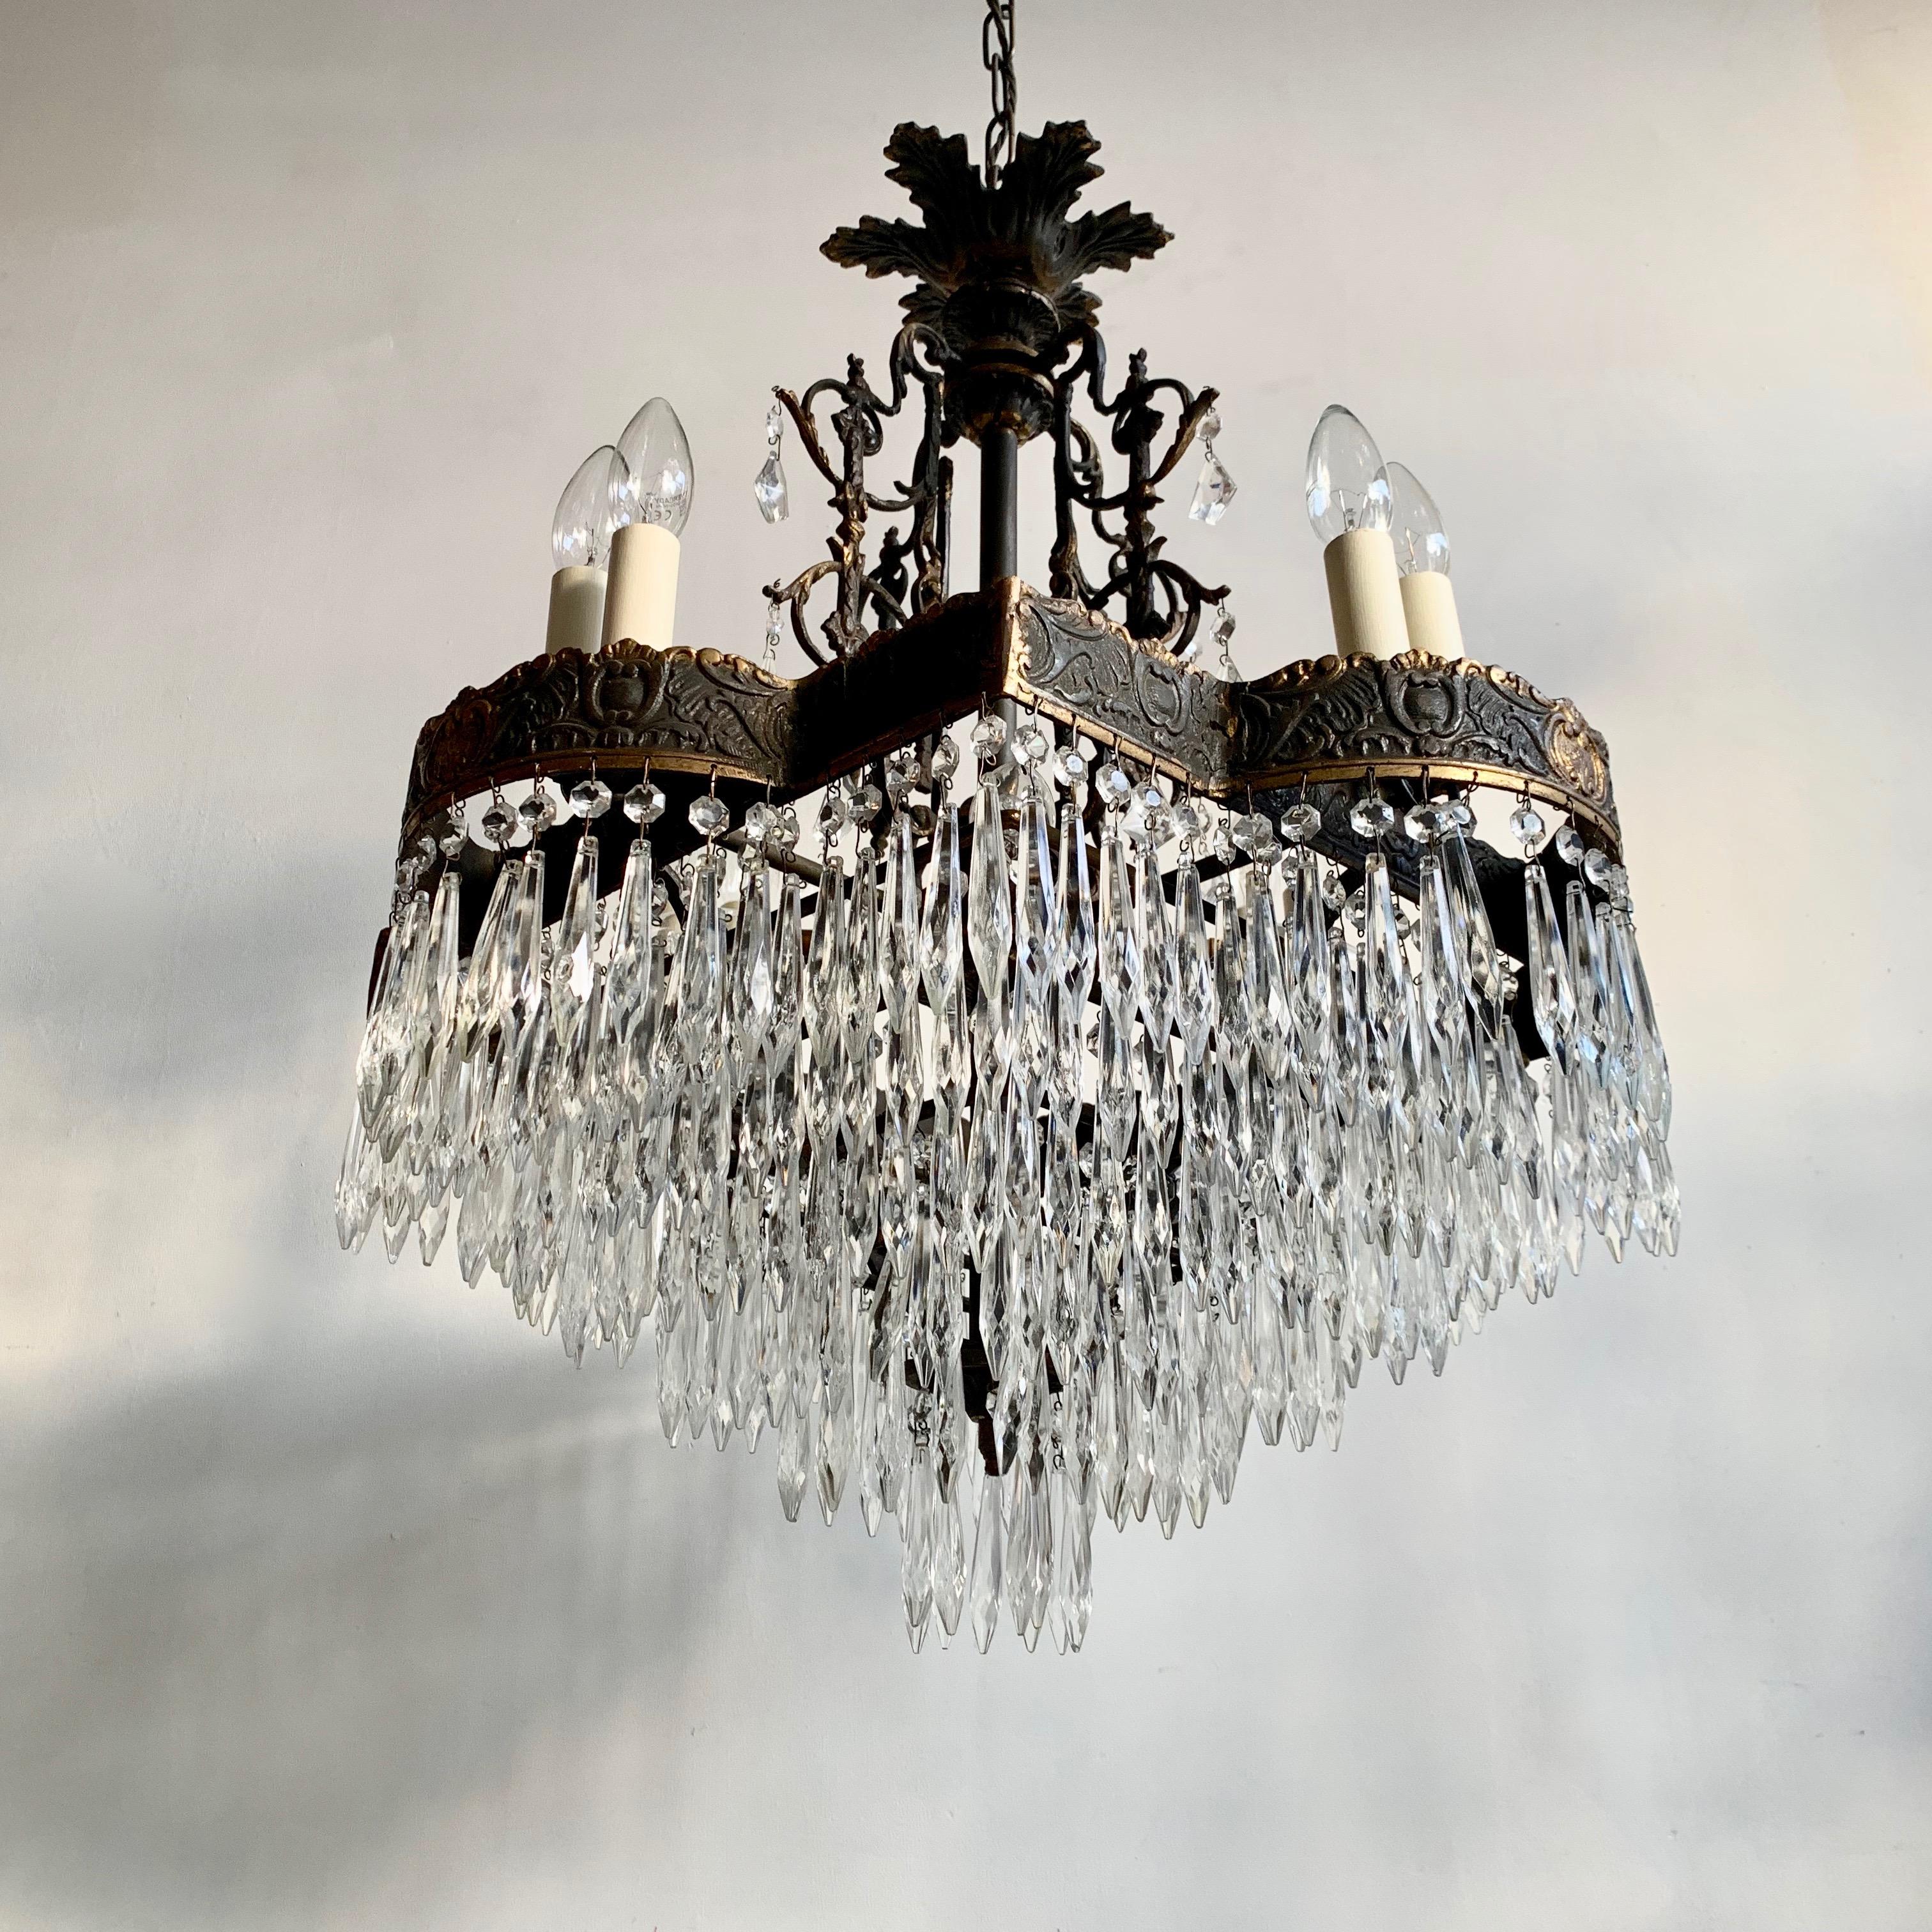 Large French Square French tiered waterfall chandelier with glass icicle drops. An unusual cast brass decorative frame with decorative patterned scrolls, the edging of the frame has a polished border and highlighted details. The center stem is